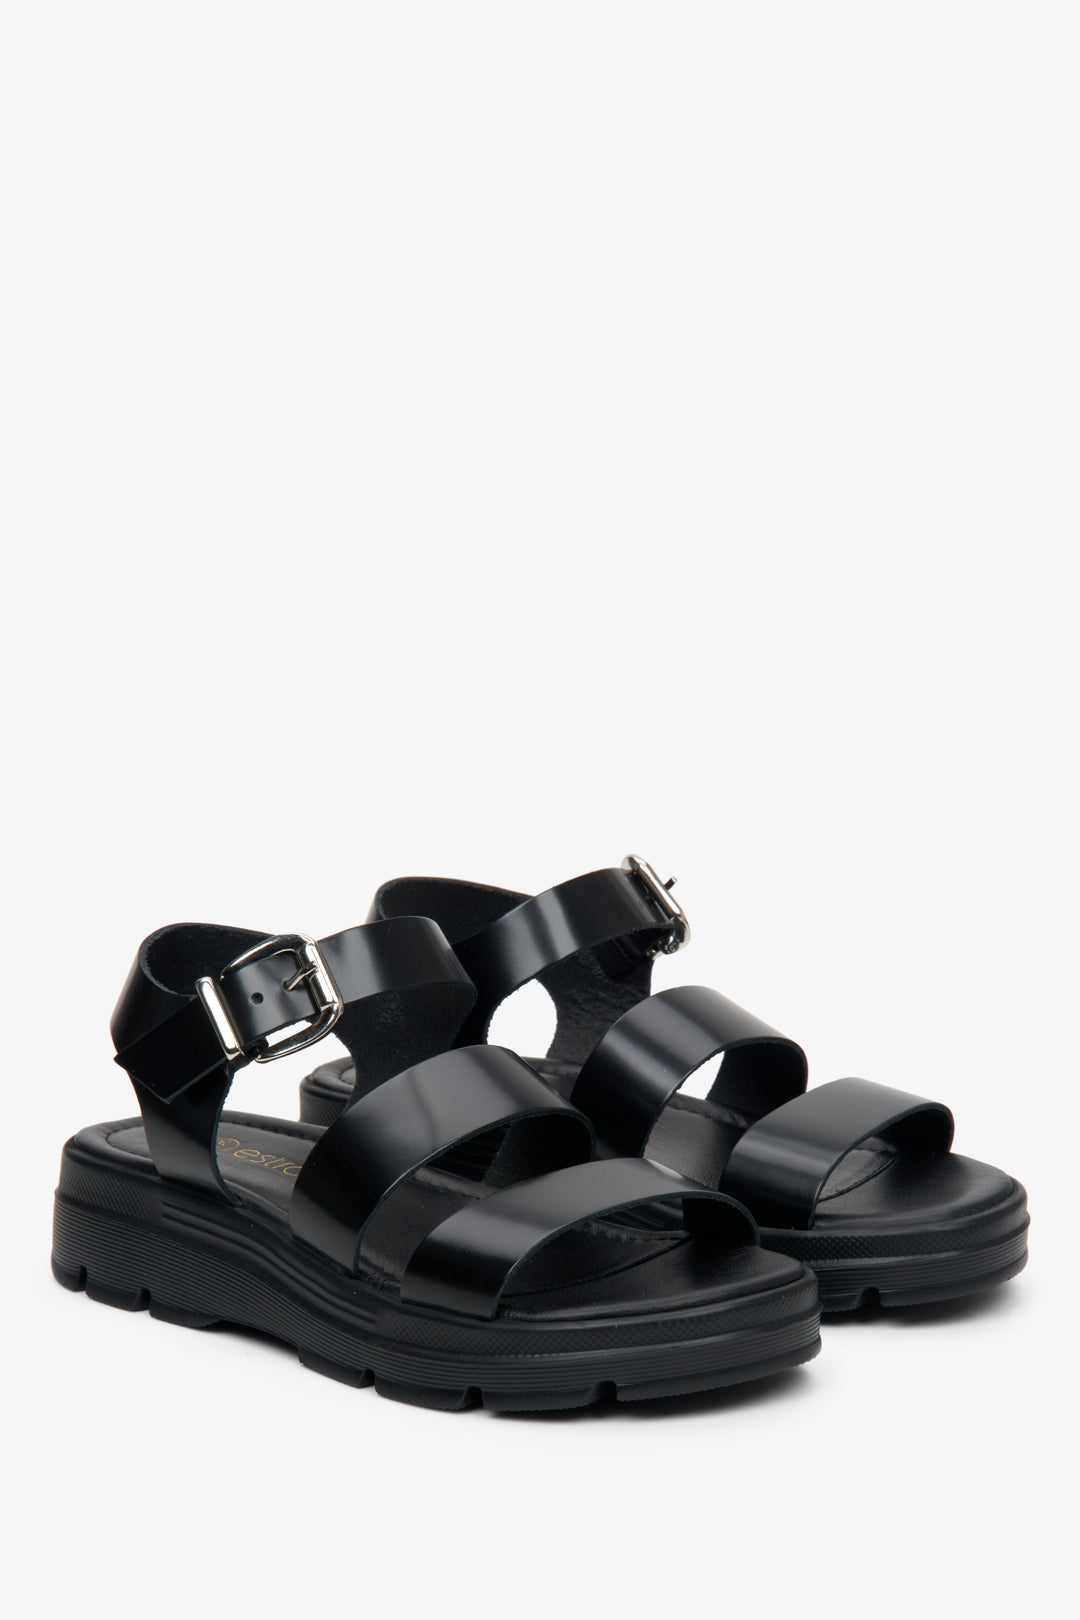 Women's sandals in black made of Italian natural leather, thick straps by Estro.